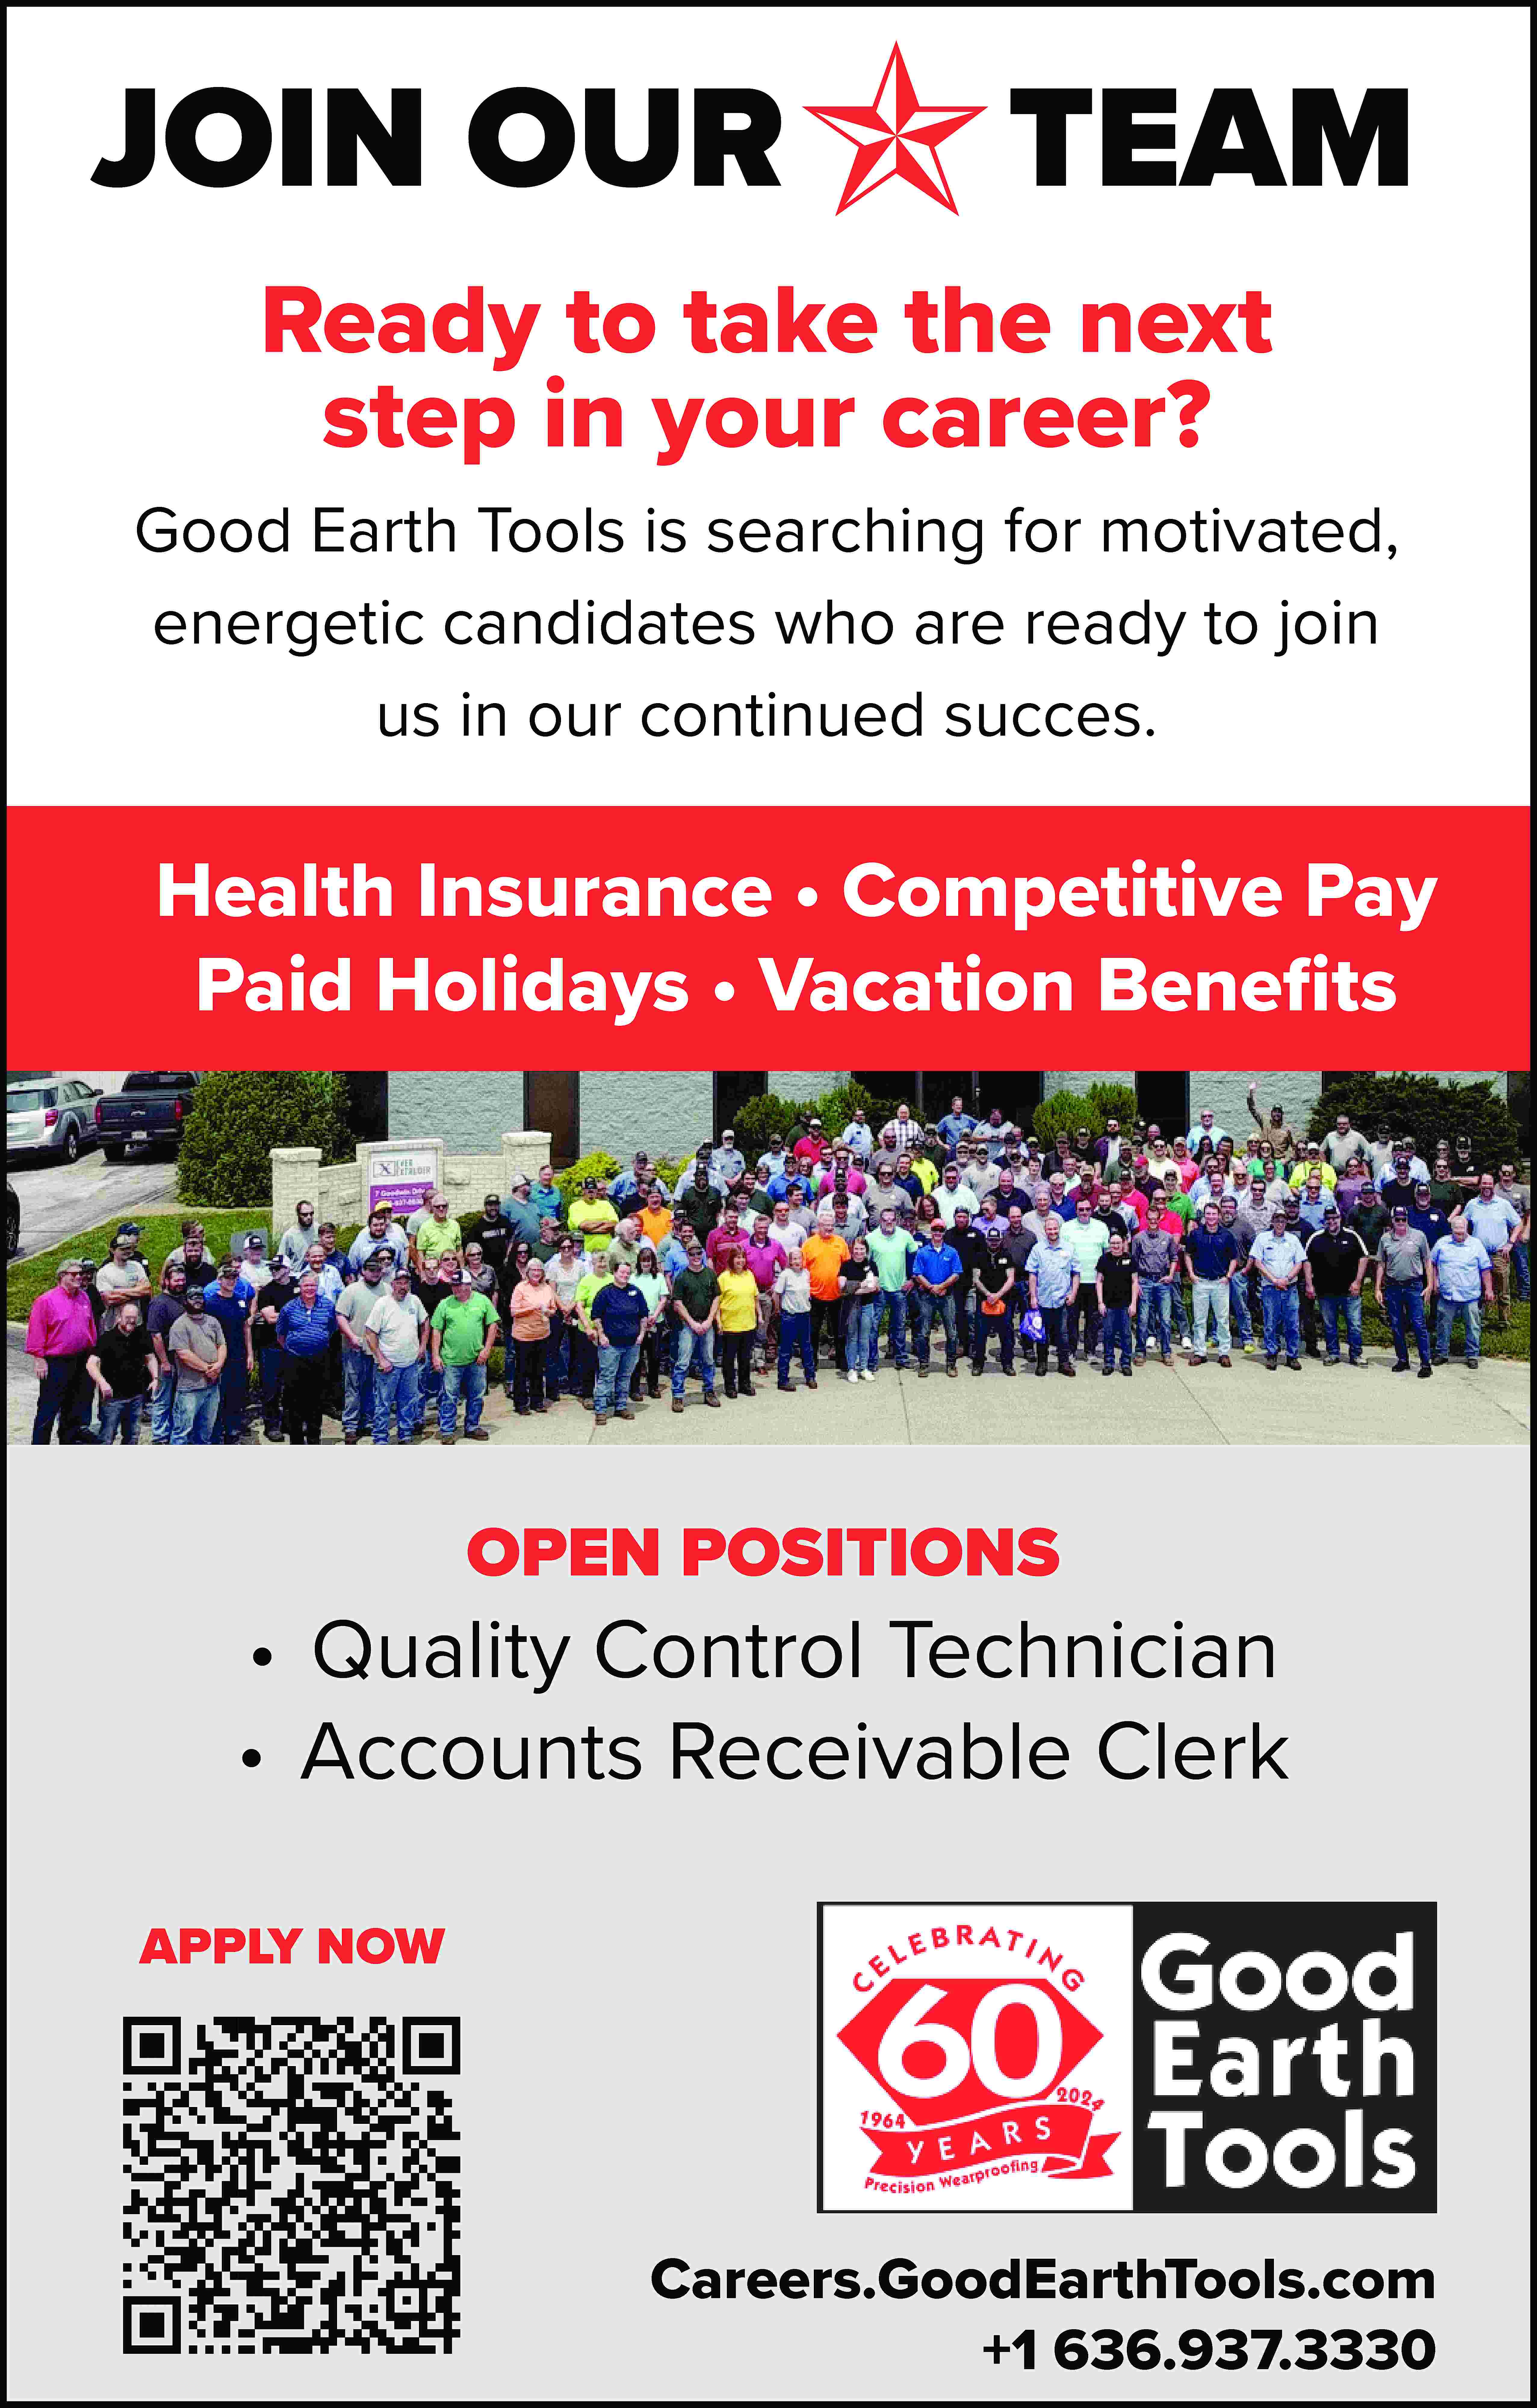 JOIN OUR TEAM Ready to  JOIN OUR TEAM Ready to take the next step in your career? Good Earth Tools is searching for motivated, energetic candidates who are ready to join us in our continued succes. Health Insurance • Competitive Pay Paid Holidays • Vacation Benefits OPEN POSITIONS • Quality Control Technician • Accounts Receivable Clerk APPLY NOW Careers.GoodEarthTools.com +1 636.937.3330